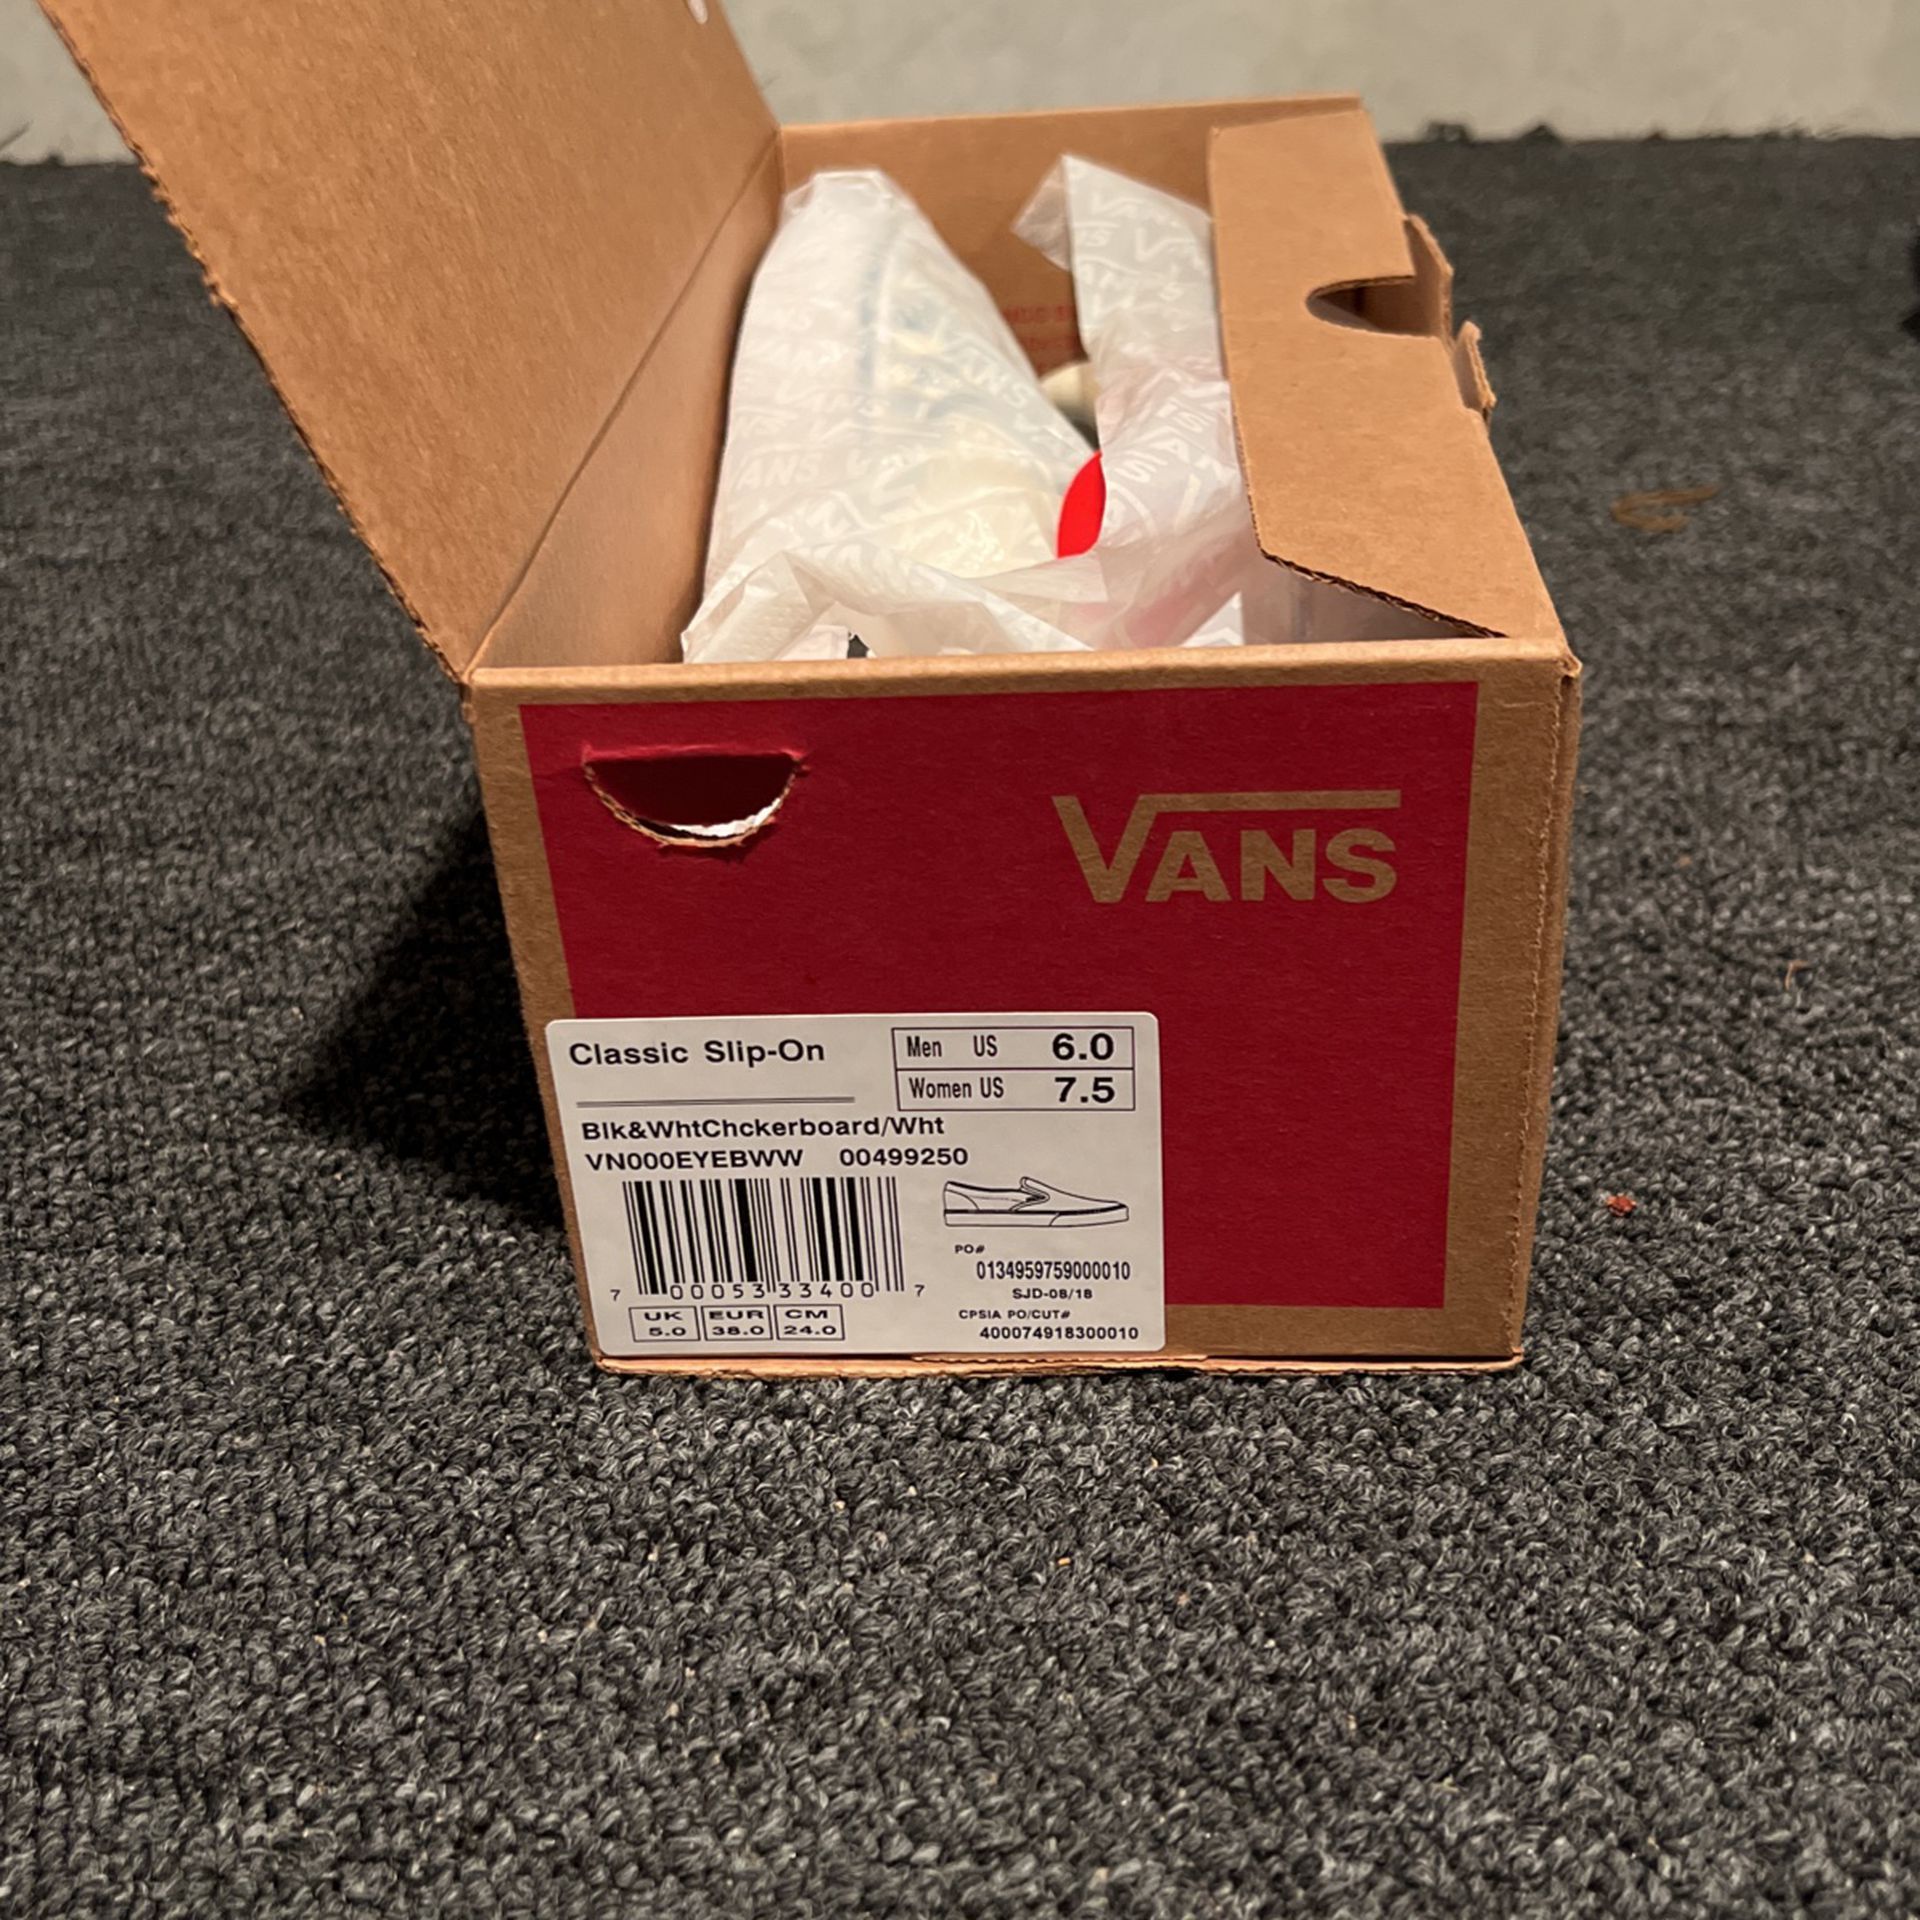 Vans NWT Classic Slip On Black And White Checkerboard 